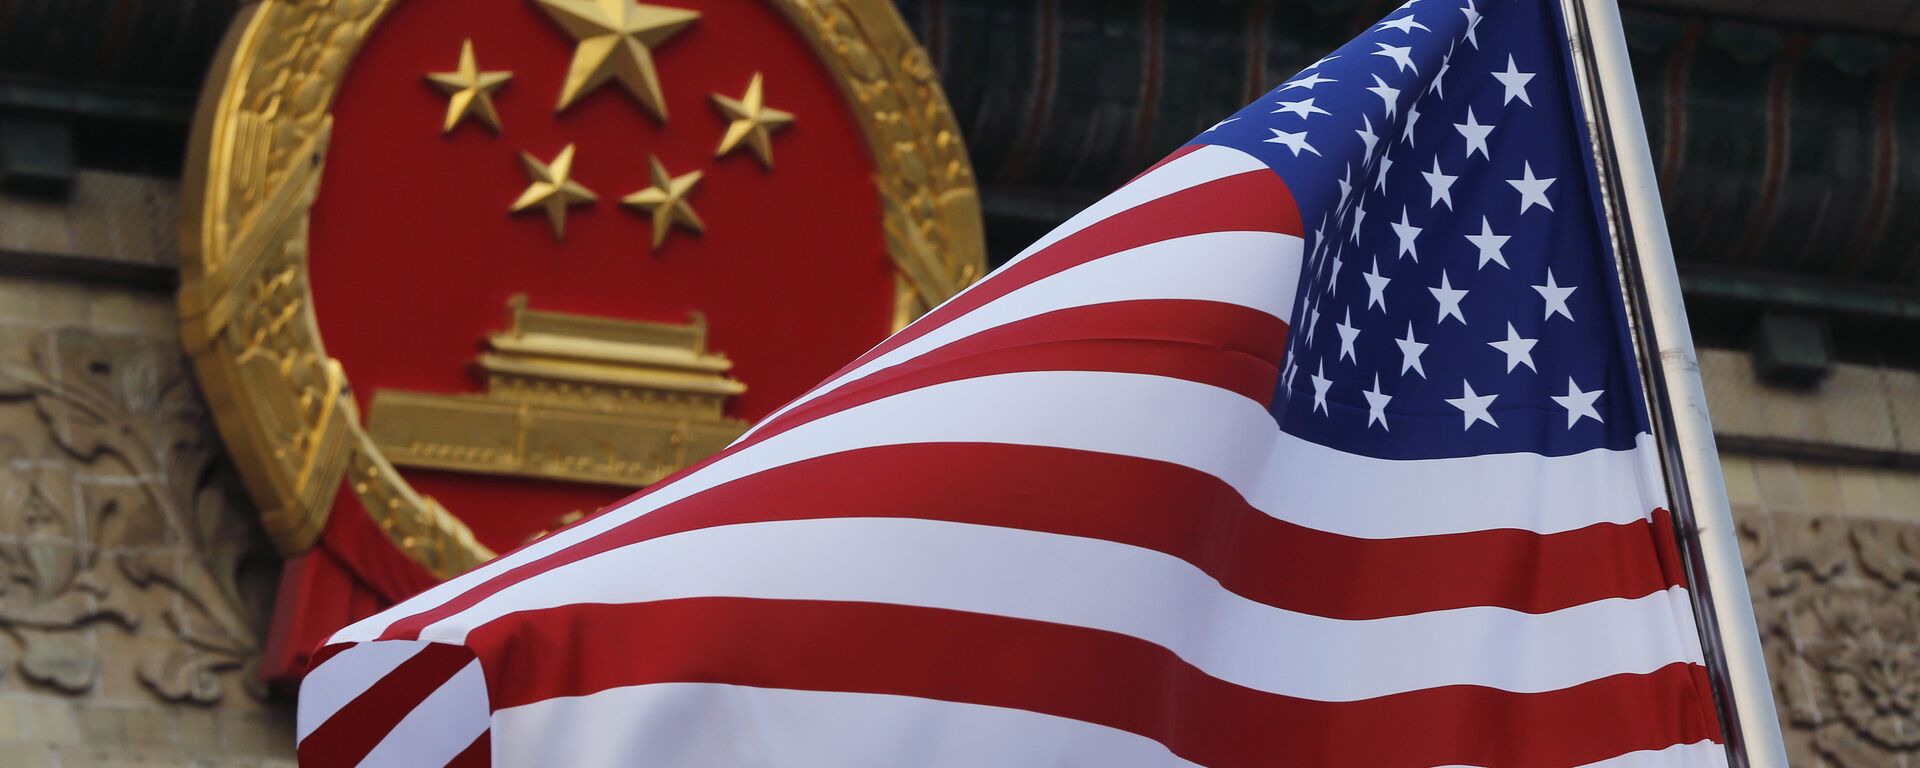 FILE - In this Nov. 9, 2017 file photo, an American flag is flown next to the Chinese national emblem during a welcome ceremony for visiting U.S. President Donald Trump outside the Great Hall of the People in Beijing - Sputnik International, 1920, 23.12.2022